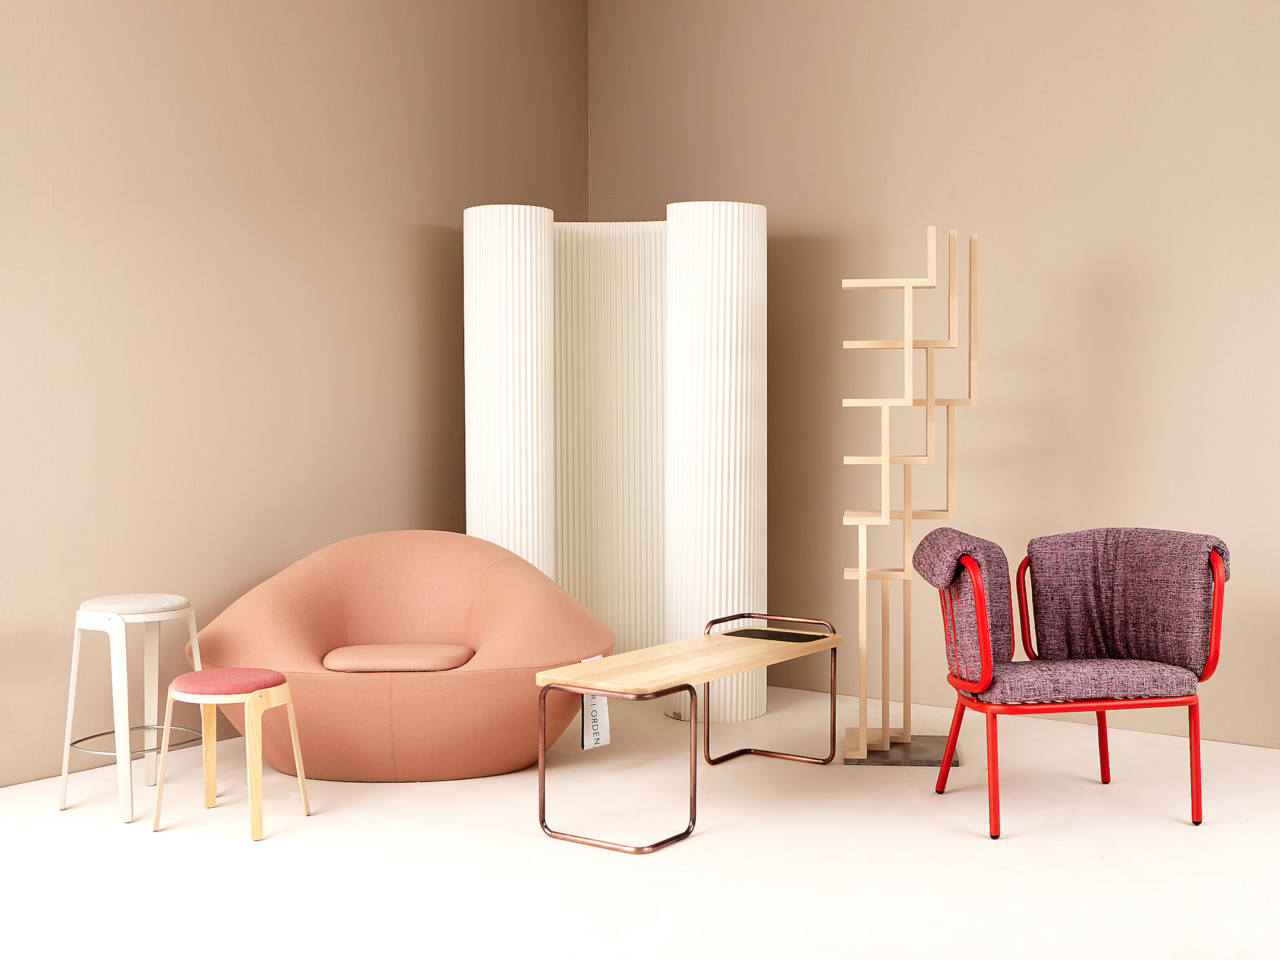 12 Students Team up with Sweden's Top Furniture Producers to Create Six Prototypes